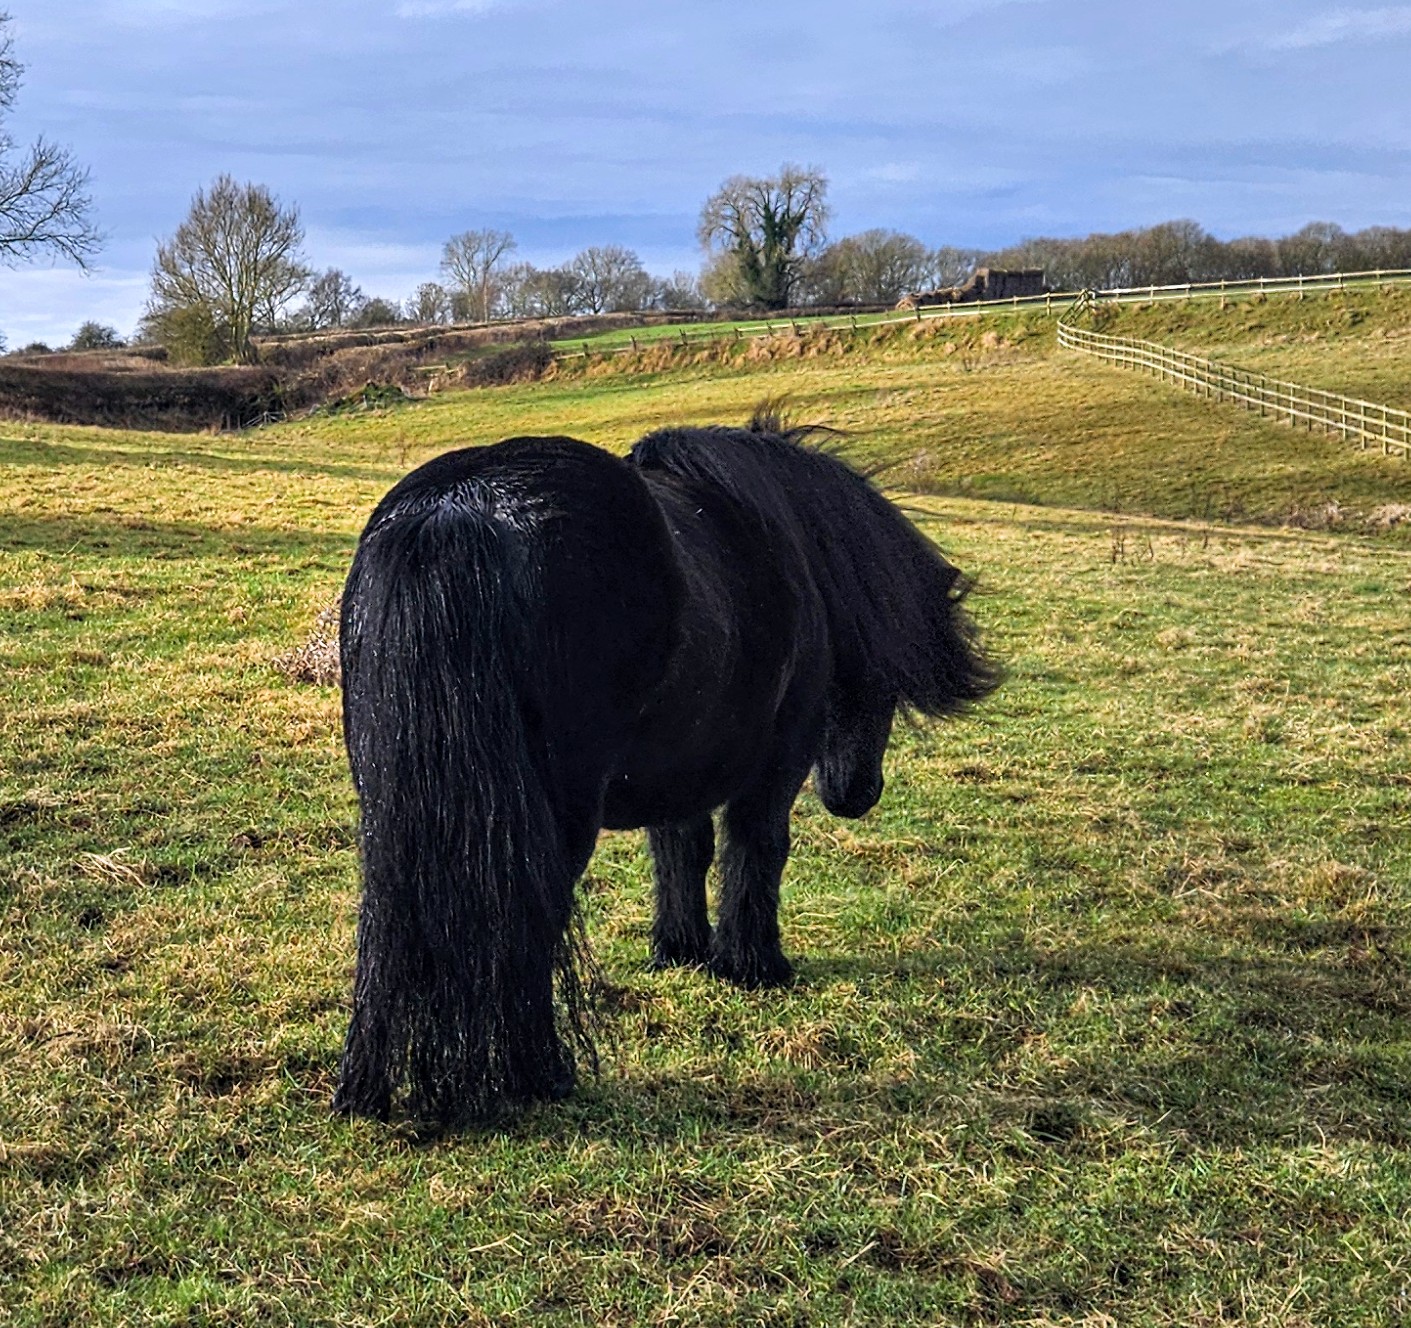 The Not-So-Secret Diary of Diva the Shetland Pony - Time for a Pamper Day